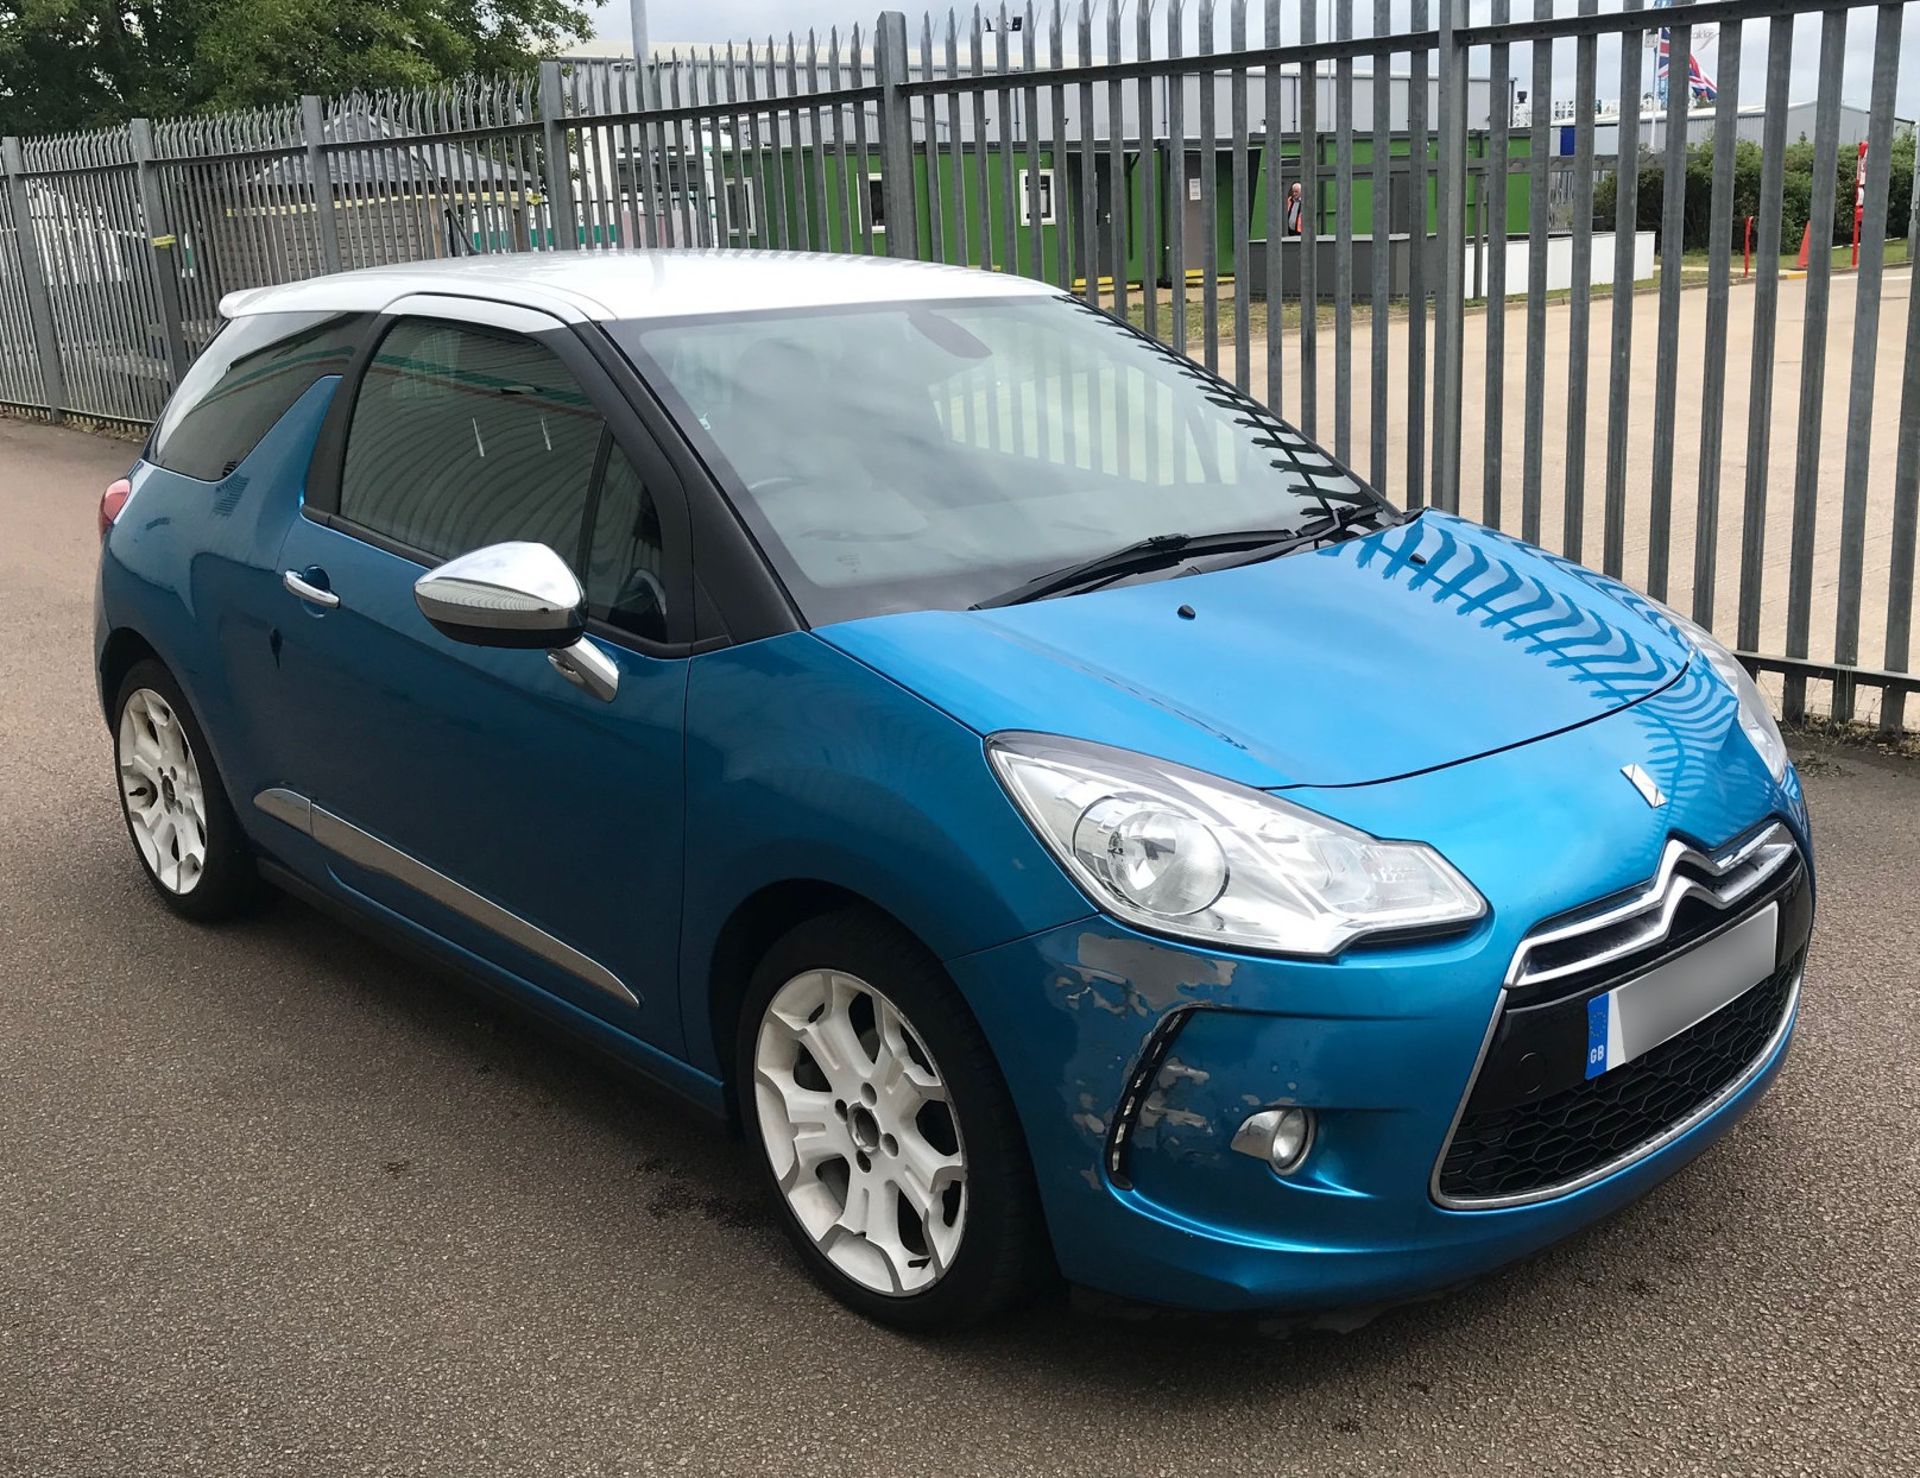 2013 Citroen DS3 1.6 e-HDi 110 Airdream DSport Plus 3dr Hatchback - CL505 - NO VAT ON THE HAMMER - Image 7 of 15